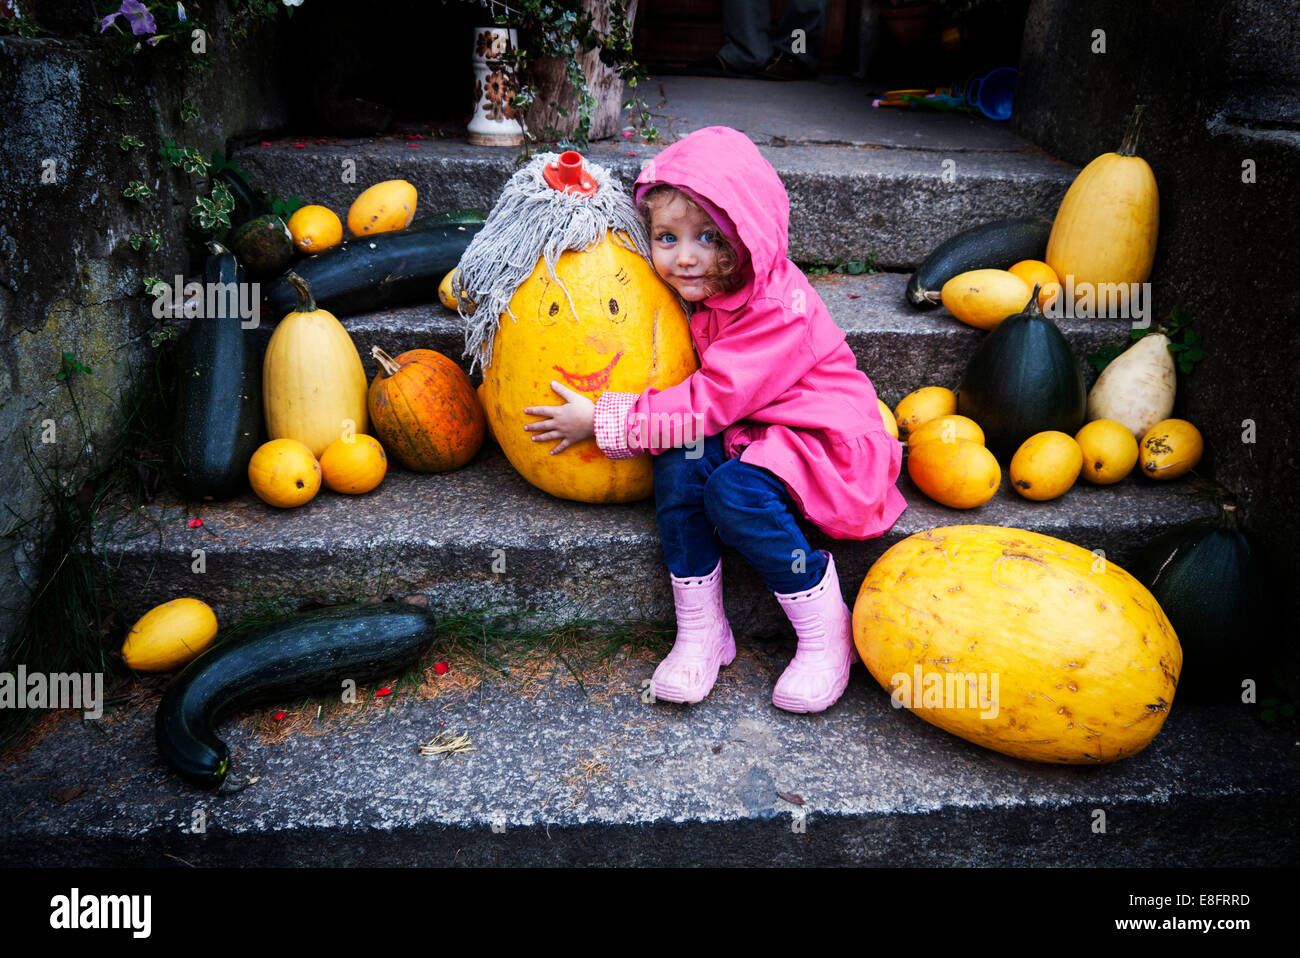 Girl sitting on steps hugging a pumpkin with a smiley face Stock Photo